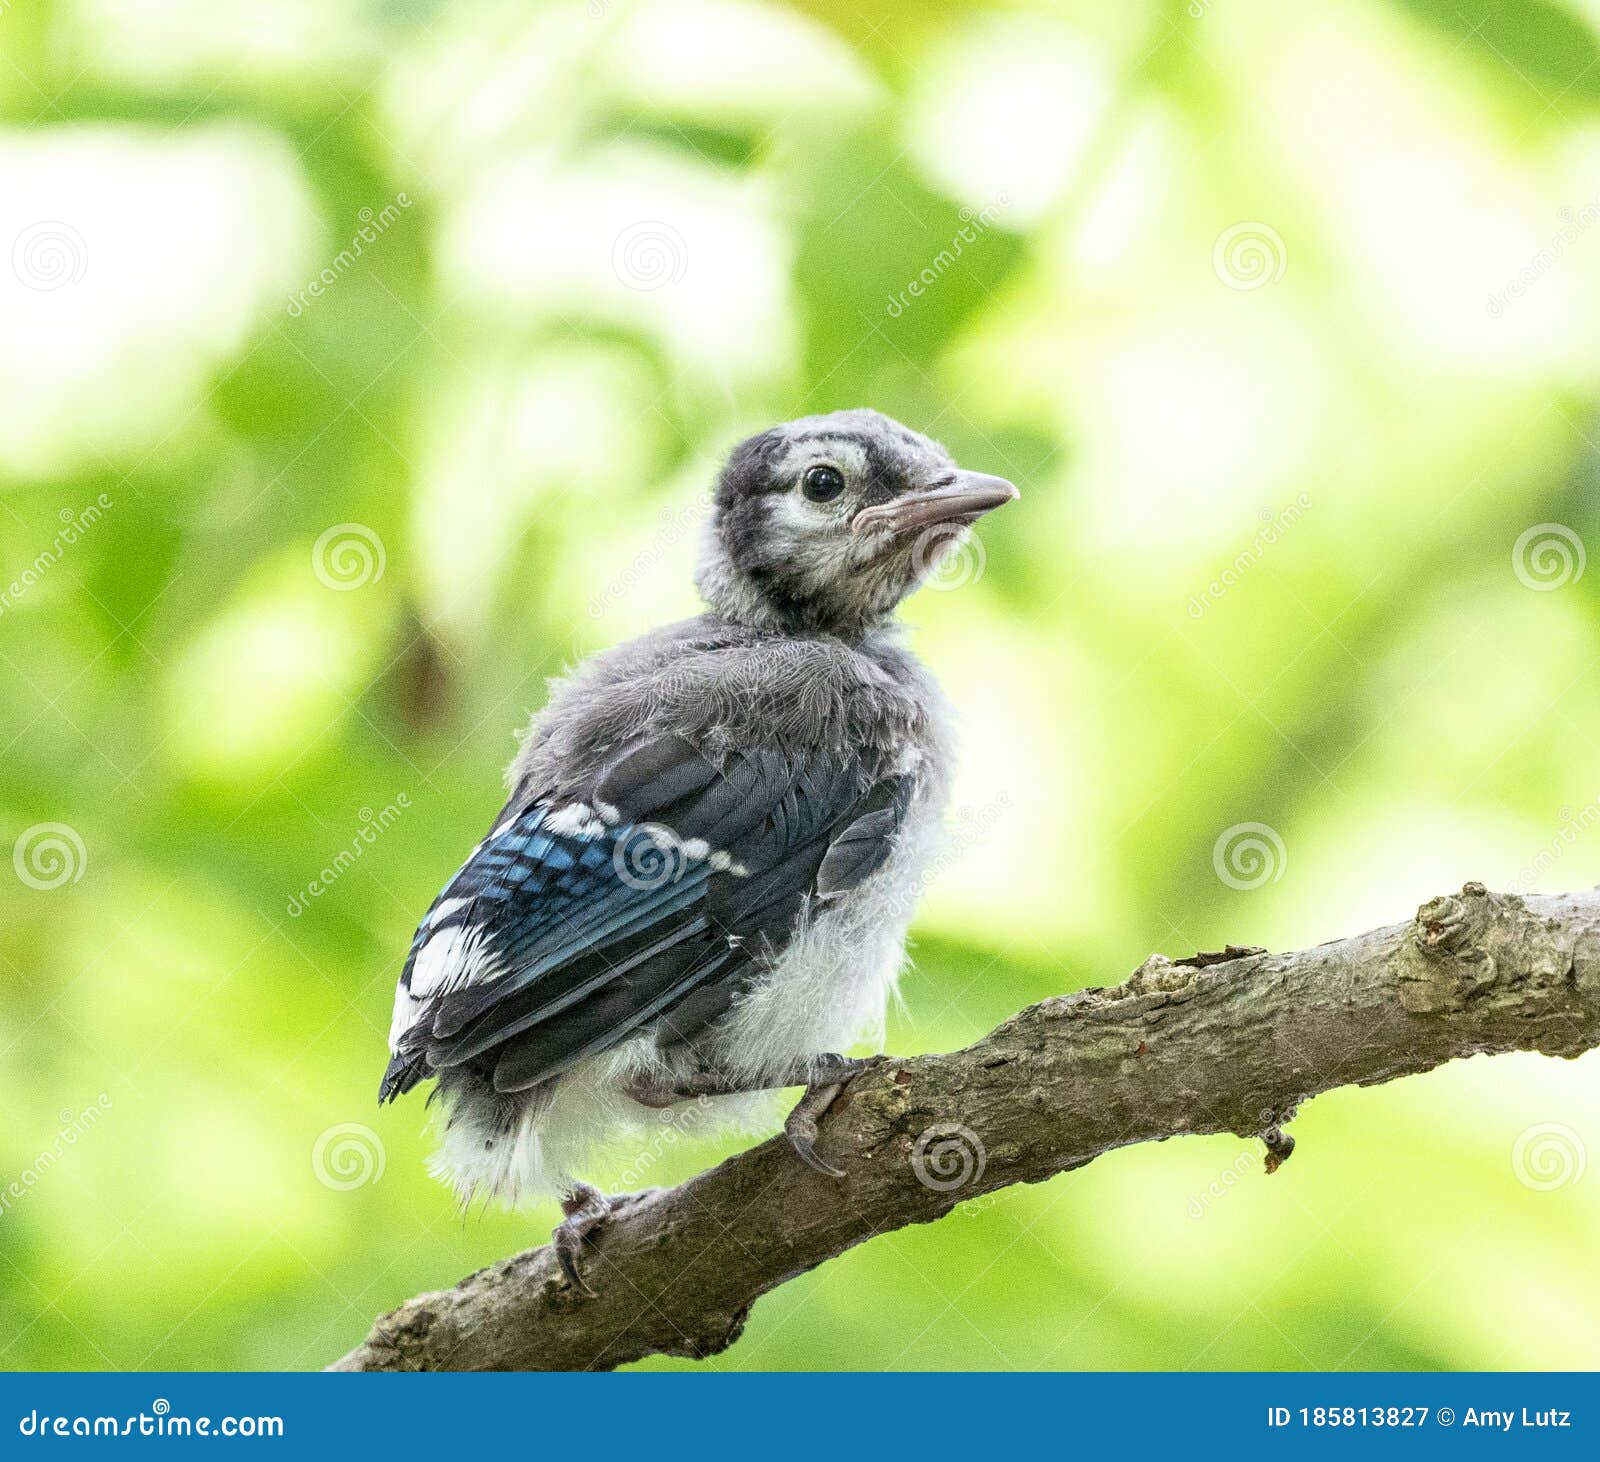 Fledgling Blue Jay Bird Photos Free Royalty Free Stock Photos From Dreamstime